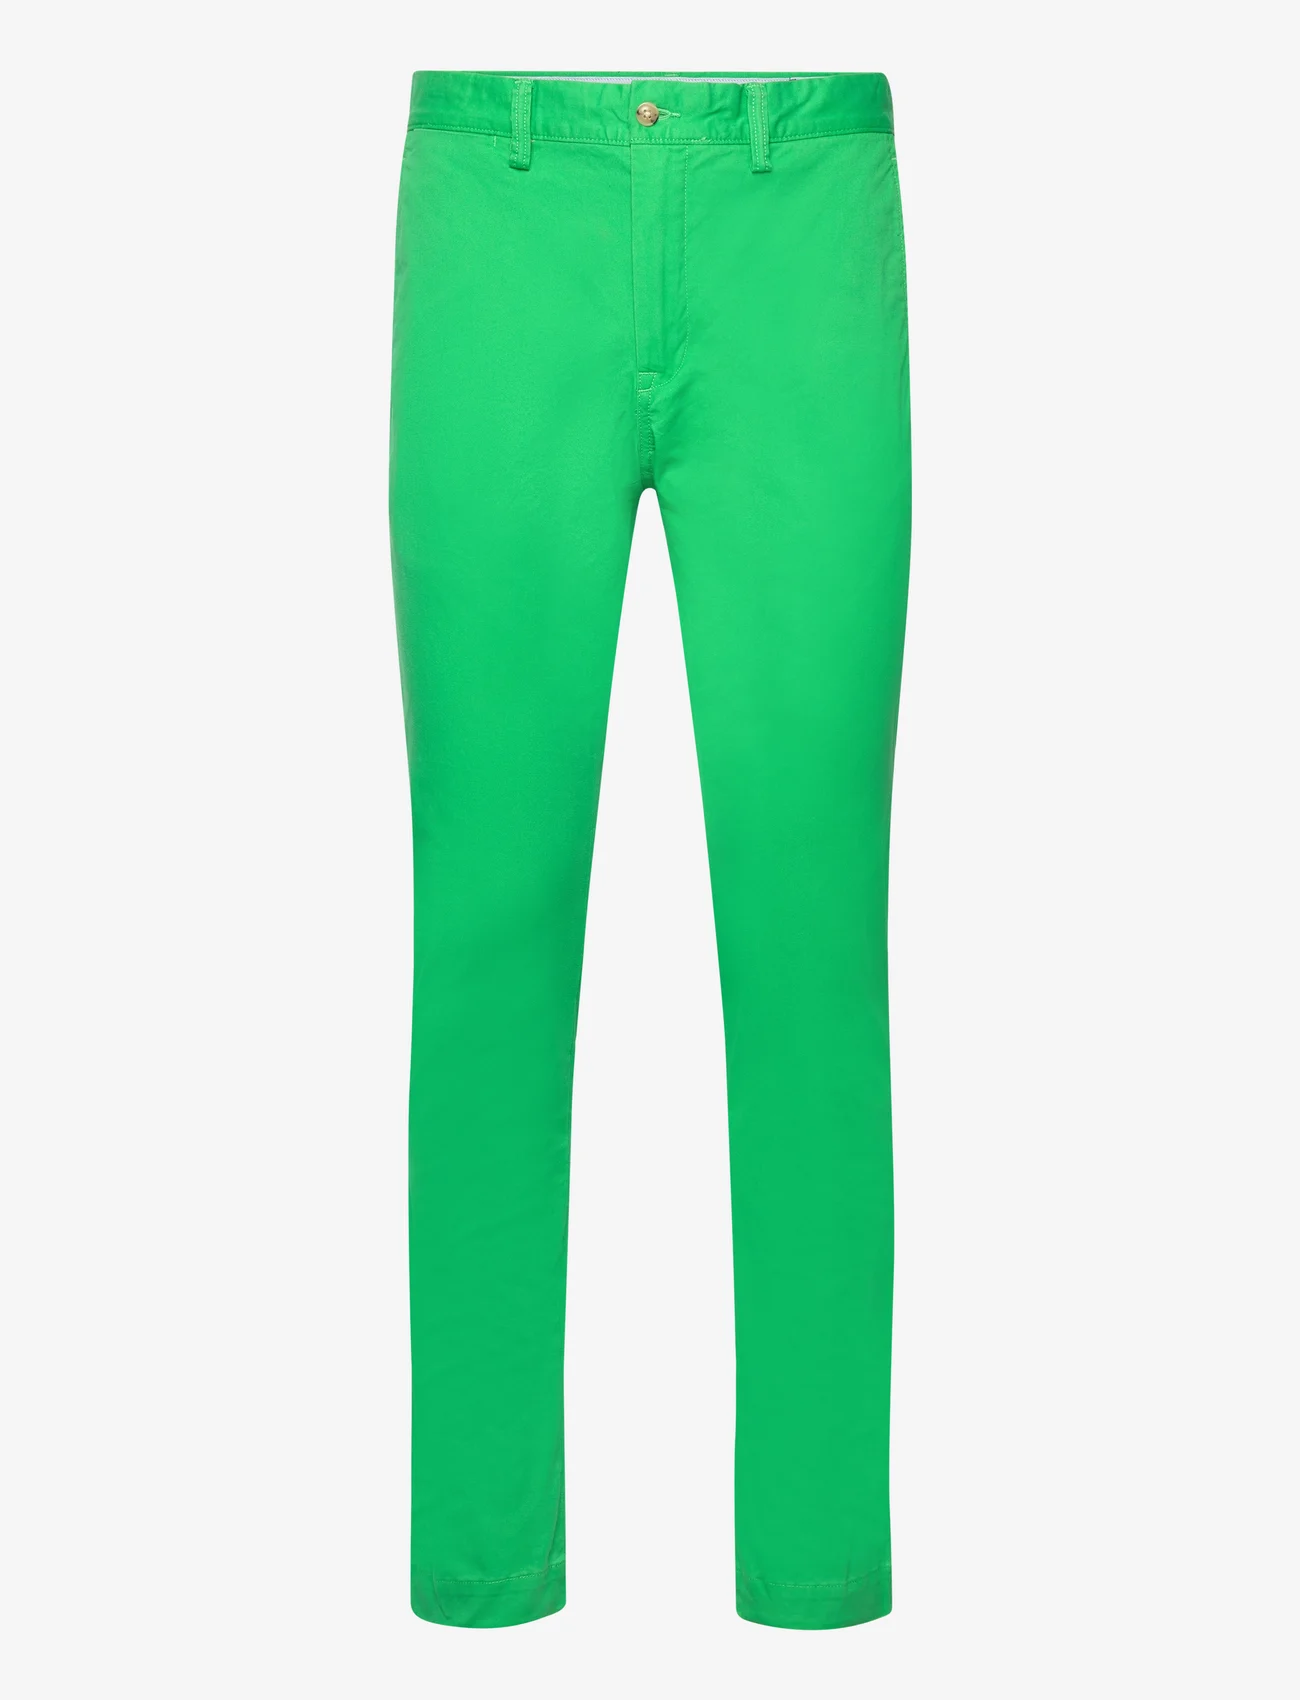 Polo Ralph Lauren - Stretch Slim Fit Washed Chino Pant - chinos - preppy green - 0